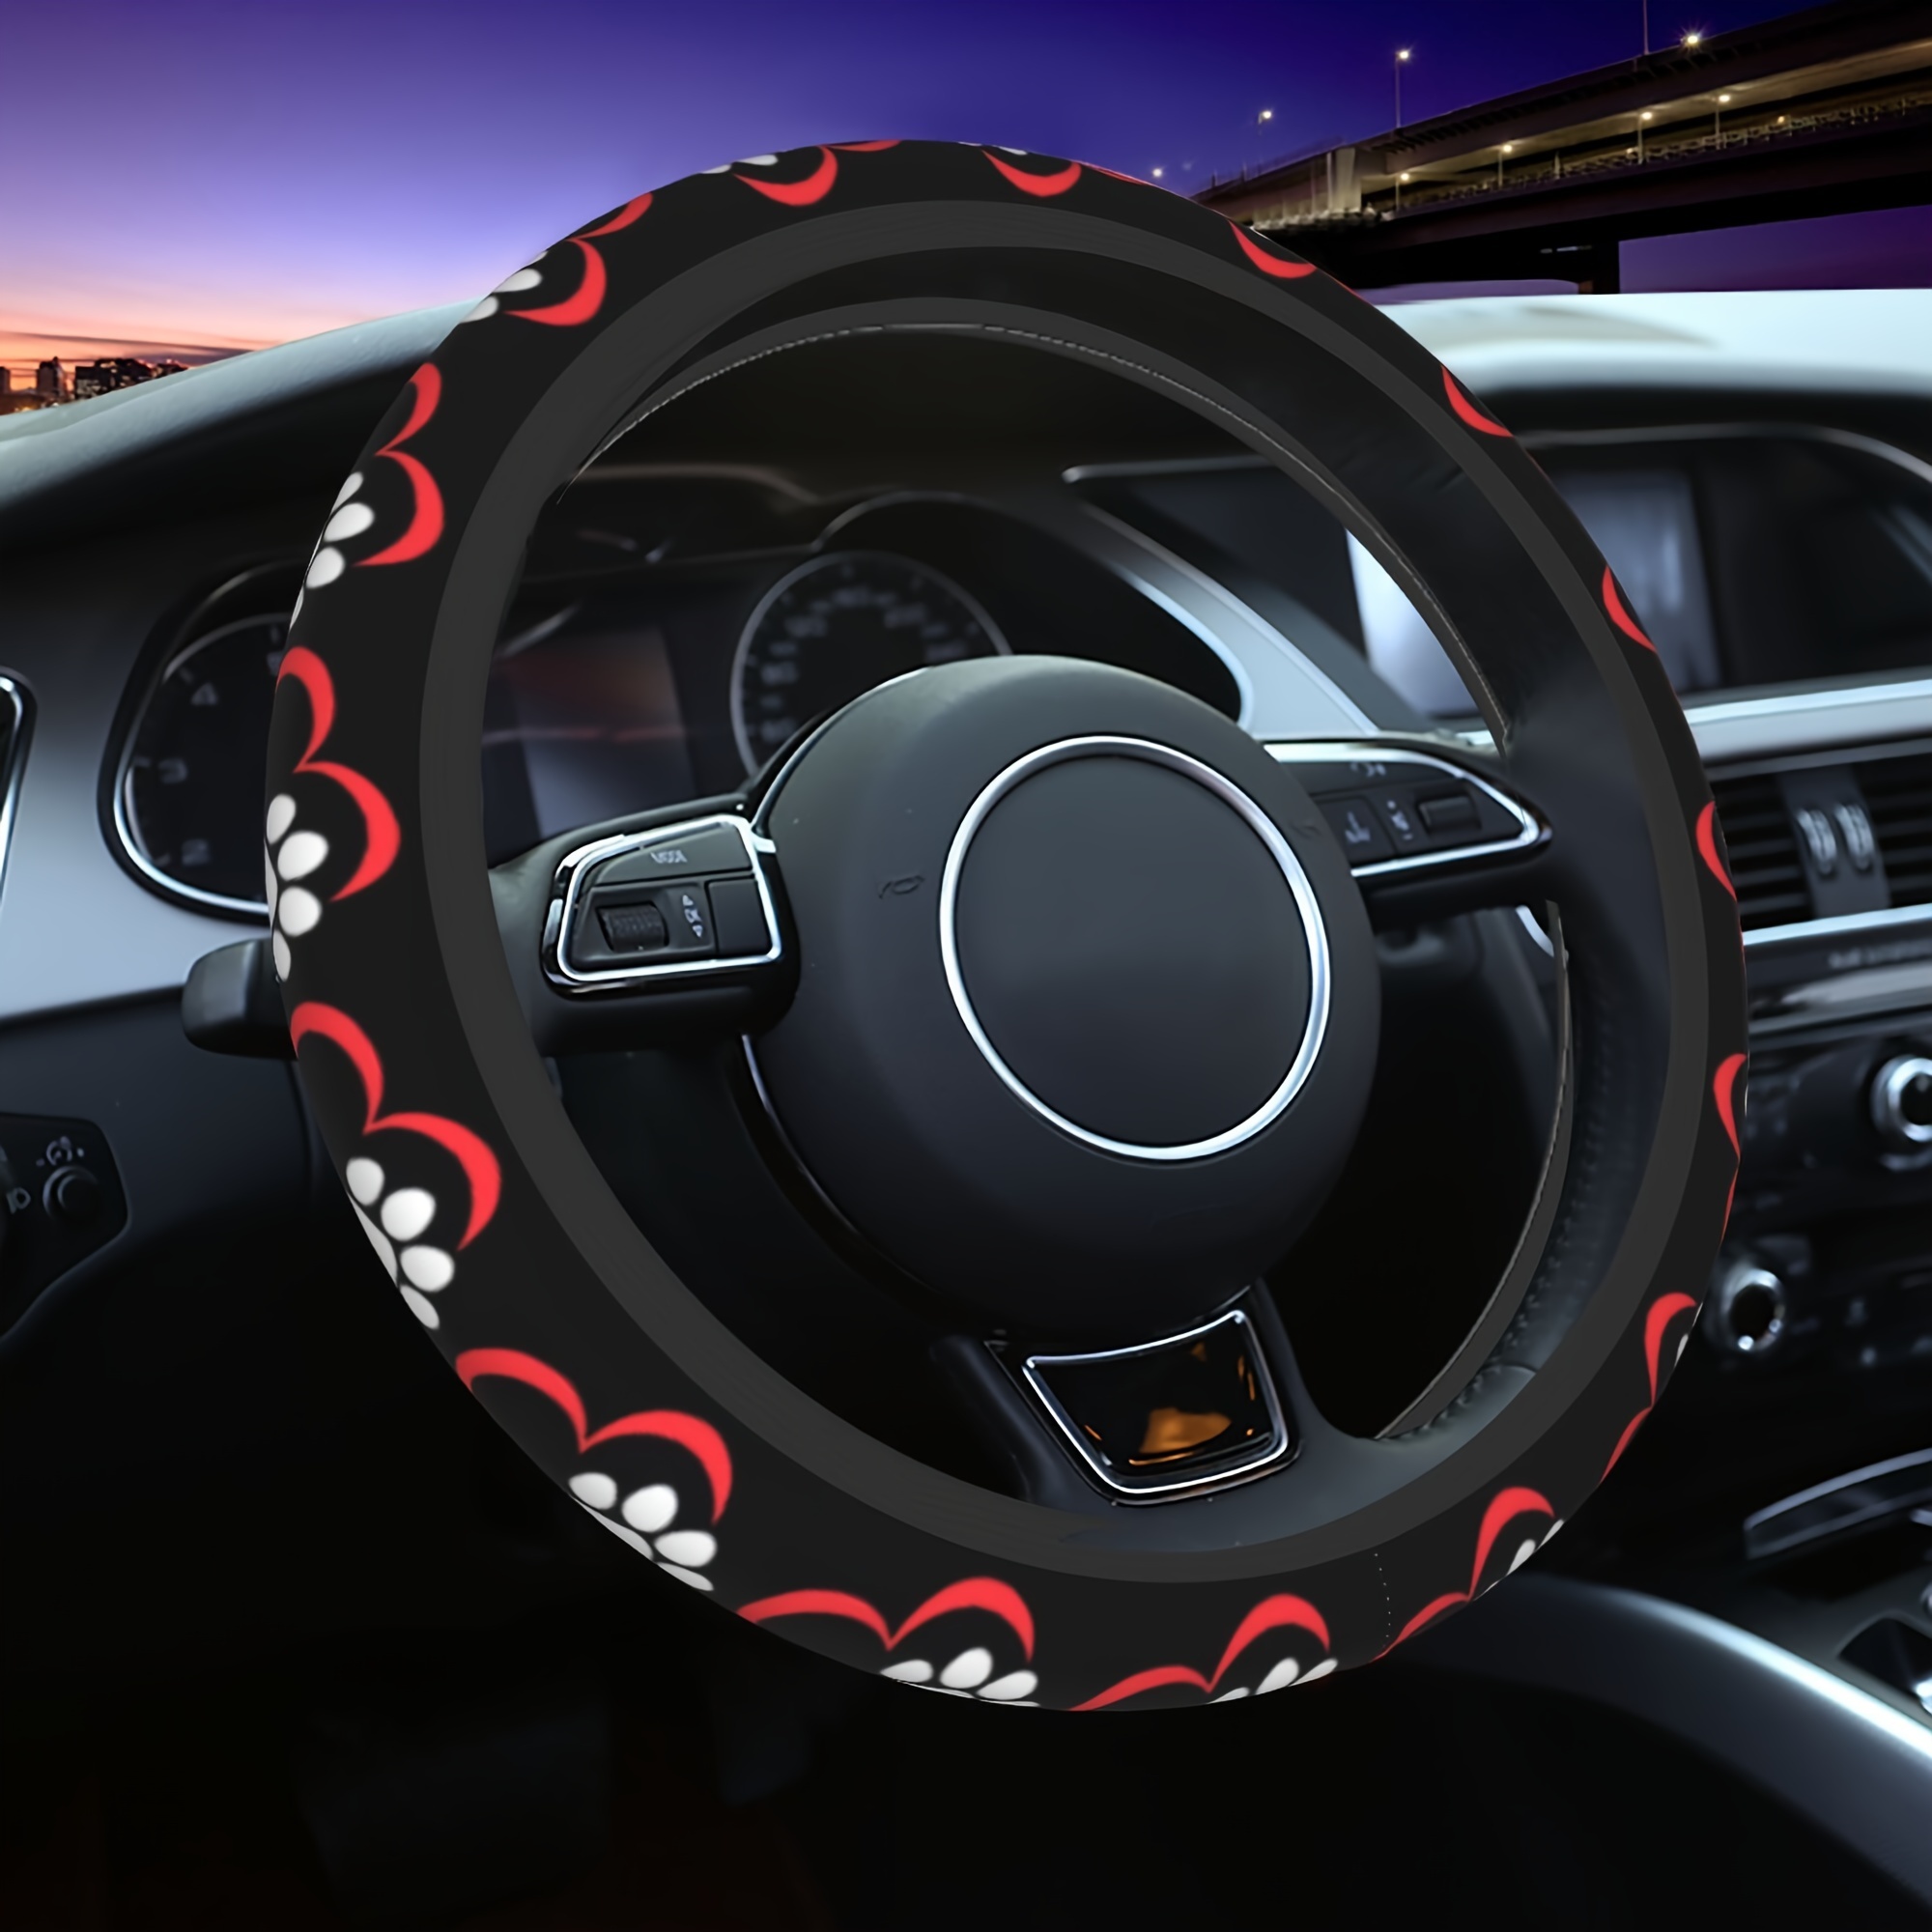 

Love & Paw Print Elastic Steering Wheel Cover - Fit, Non-slip Grip For Men & Women, Polyester Car Accessory